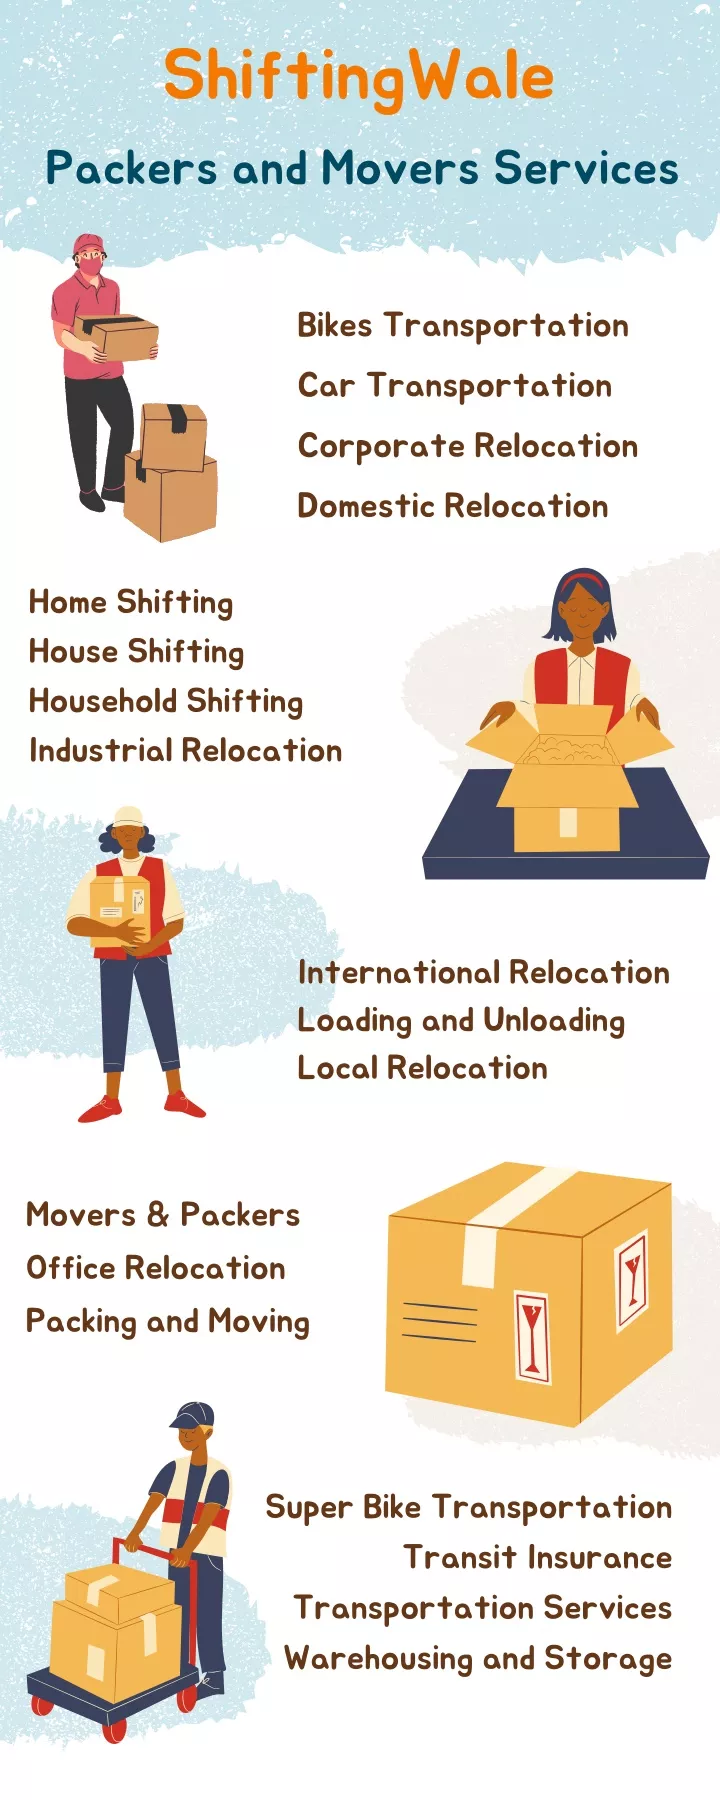 shiftingwale packers and movers services